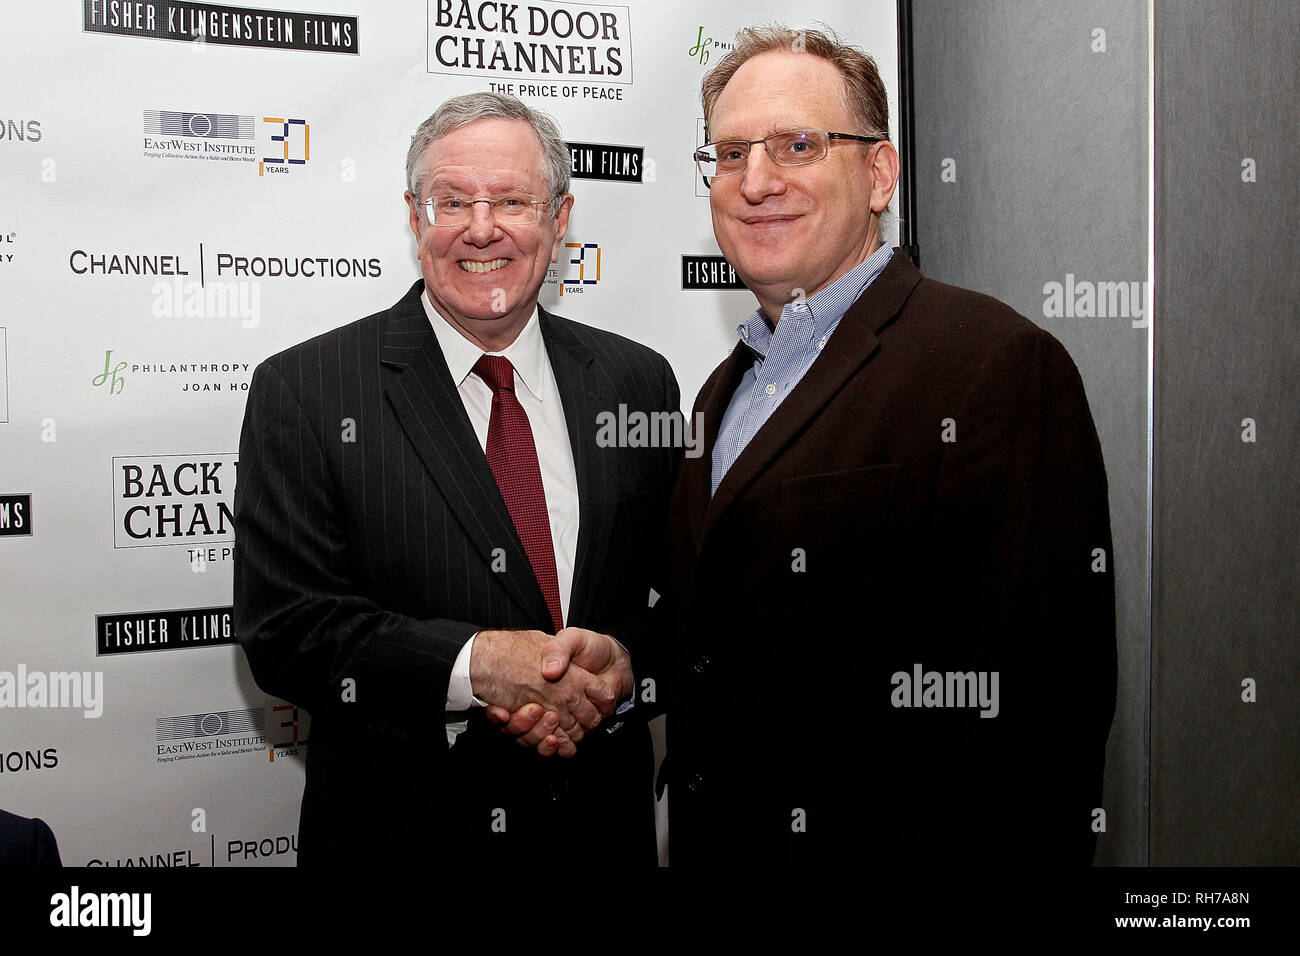 New York, USA. 18 Sep, 2011. Steve Forbes, Danny Fisher at The Sunday, Sep 18, 2011 Screening Of Film 'Back Door Channel: The Price Of Peace' at Quad Cinema in New York, USA. Credit: Steve Mack/S.D. Mack Pictures/Alamy Stock Photo